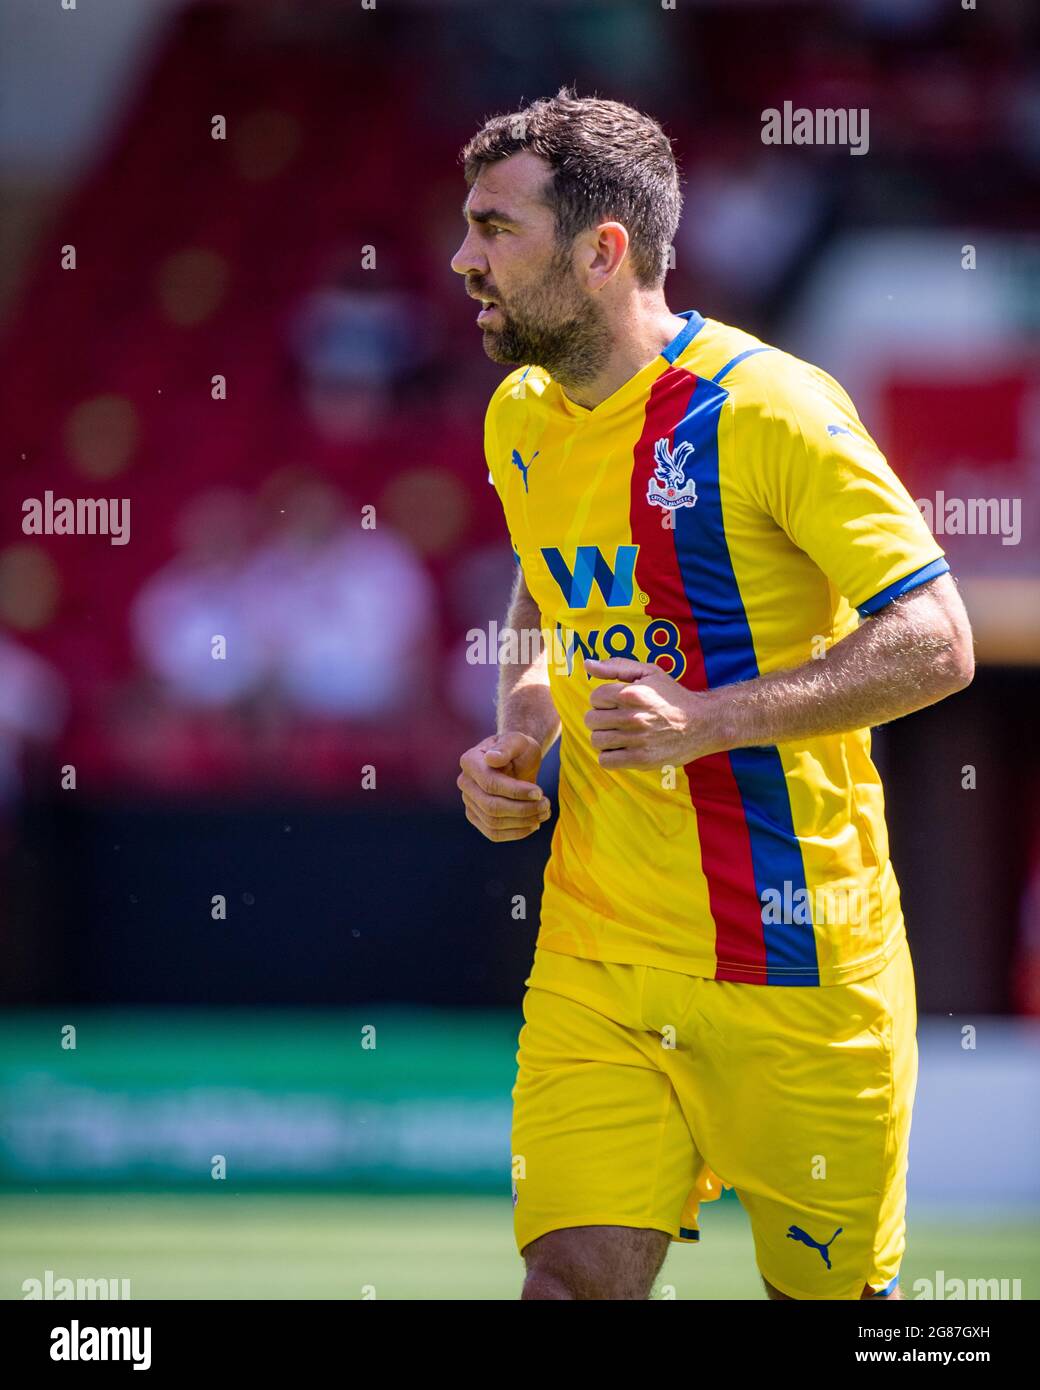 WALSALL, ENGLAND - JULY 17: James McArthur of Crystal Palace at Banks' Stadium on July 17, 2021 in Walsall, England. (Photo by Sebastian Frej) Stock Photo